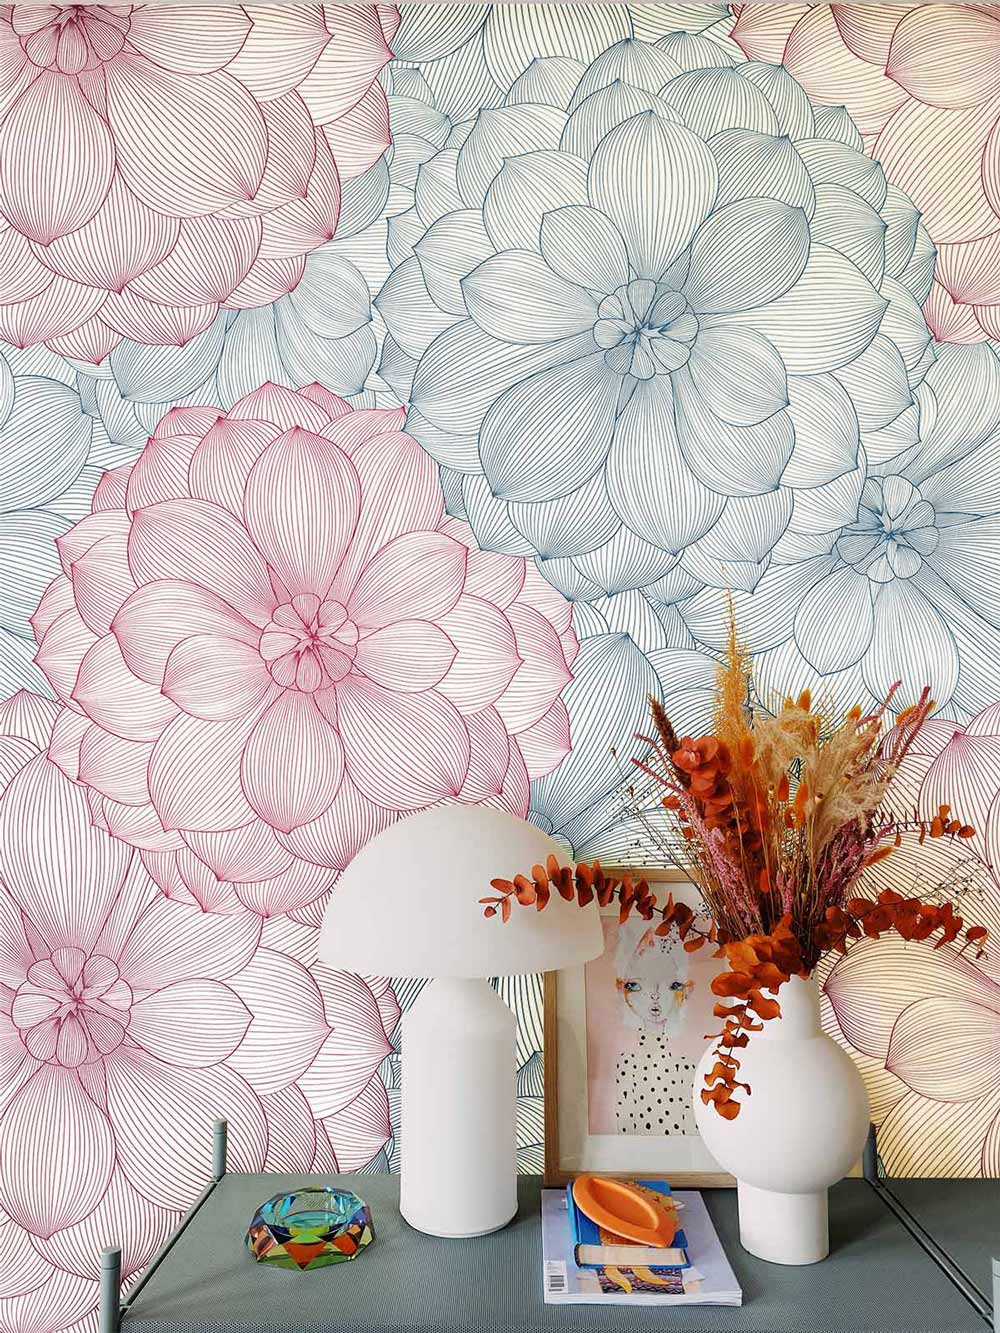 in a vintage wallpaper arrangement with a view of blossoming flowers